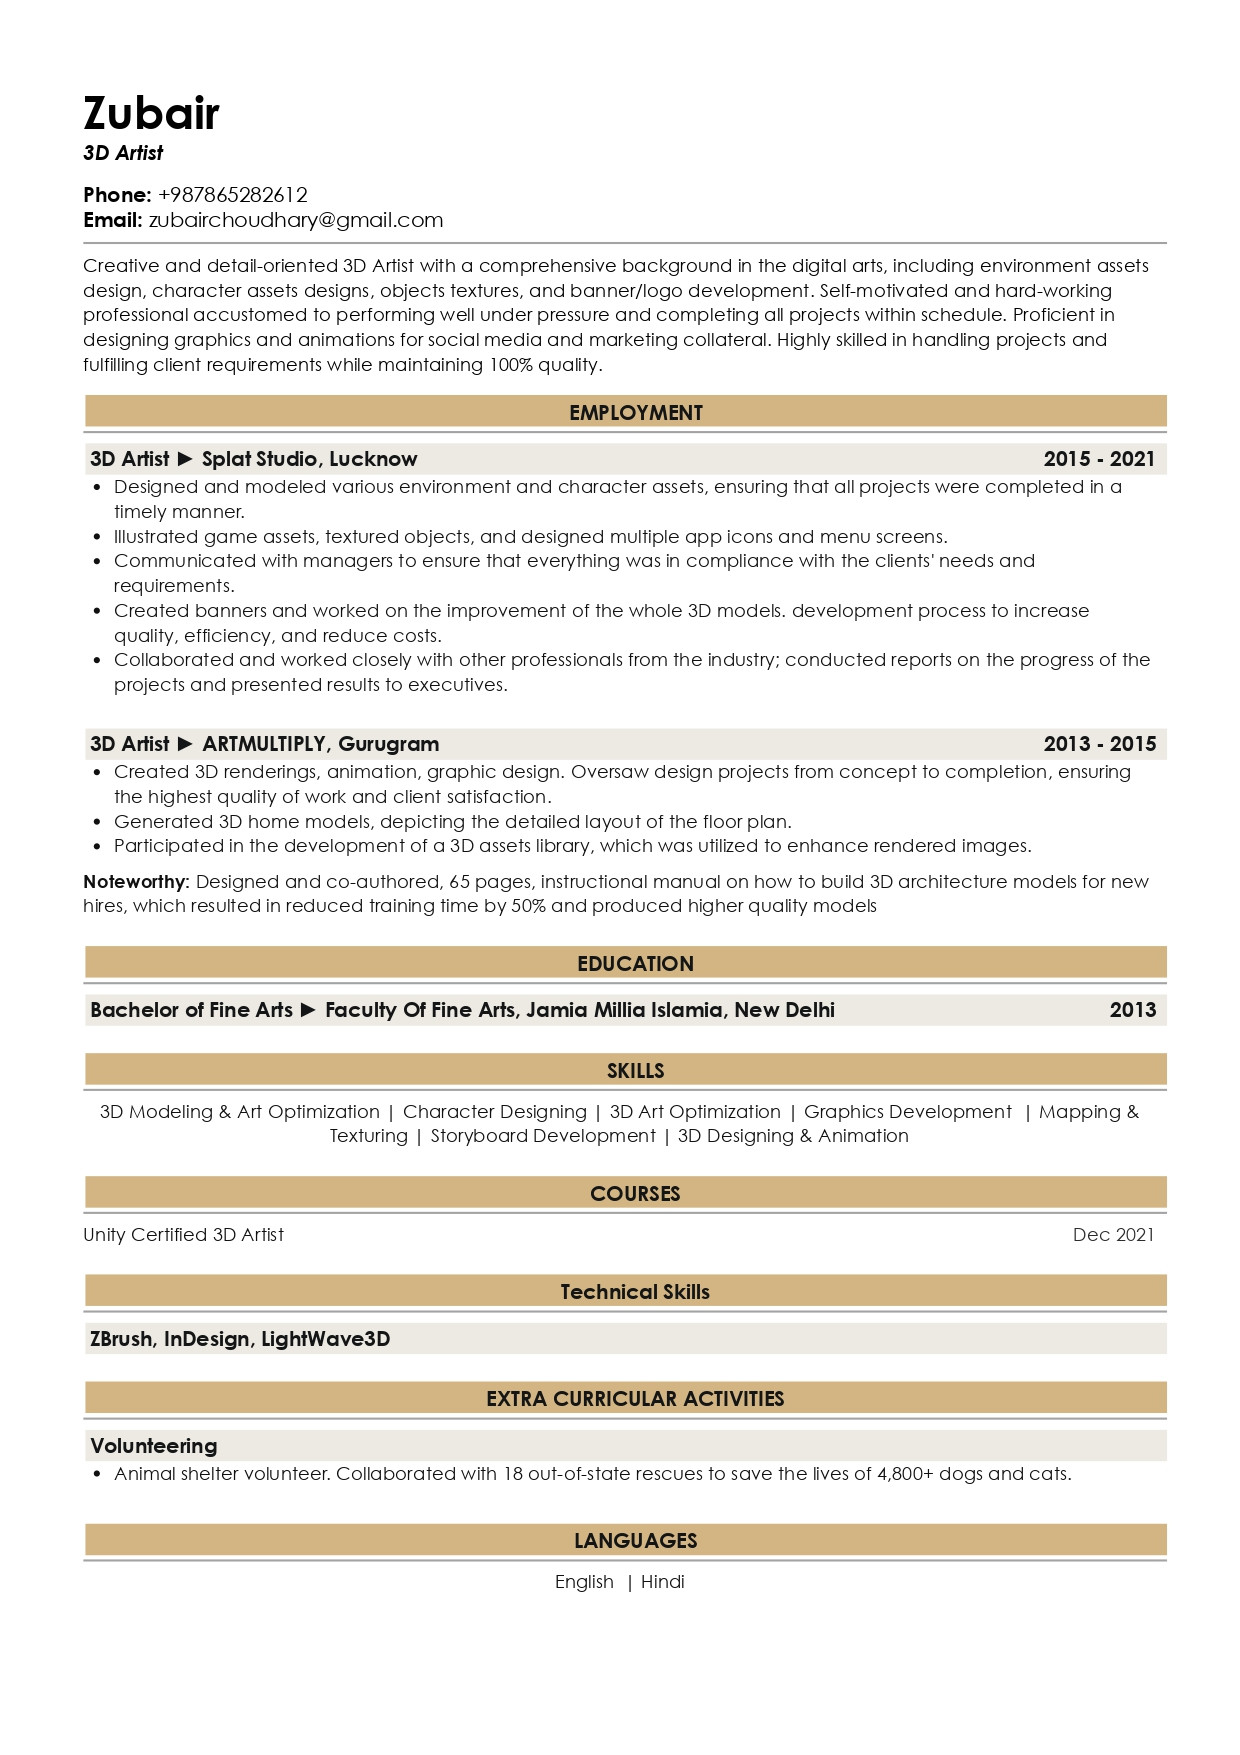 Resume Sample for Story Board Artist Sample Resume Of 3d Artist with Template & Writing Guide Resumod.co